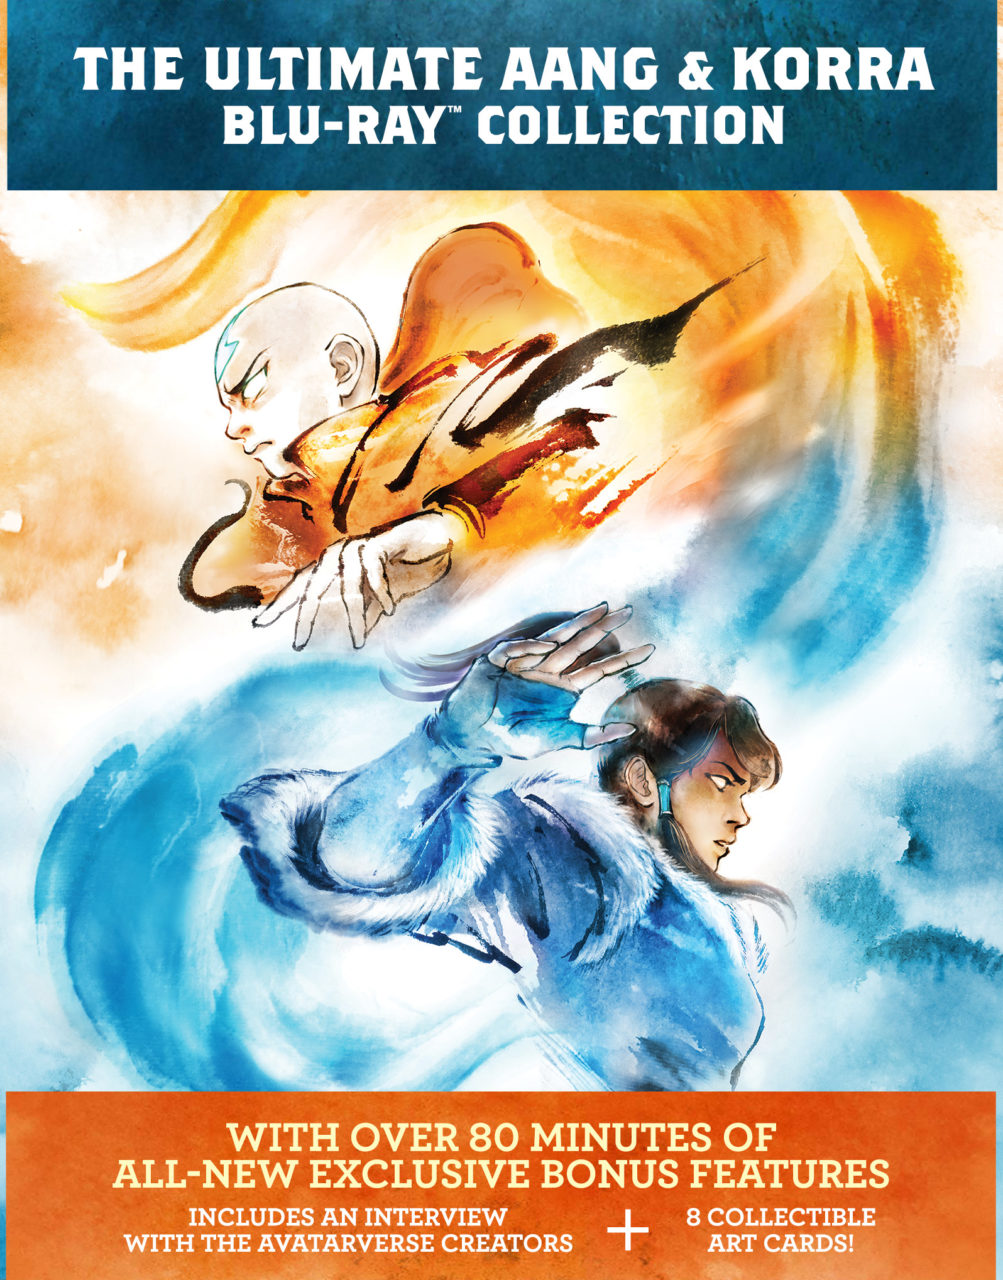 The Ultimate Aang & Korra Blu-Ray Collection cover (Nickelodeon/Paramount Home Entertainment)